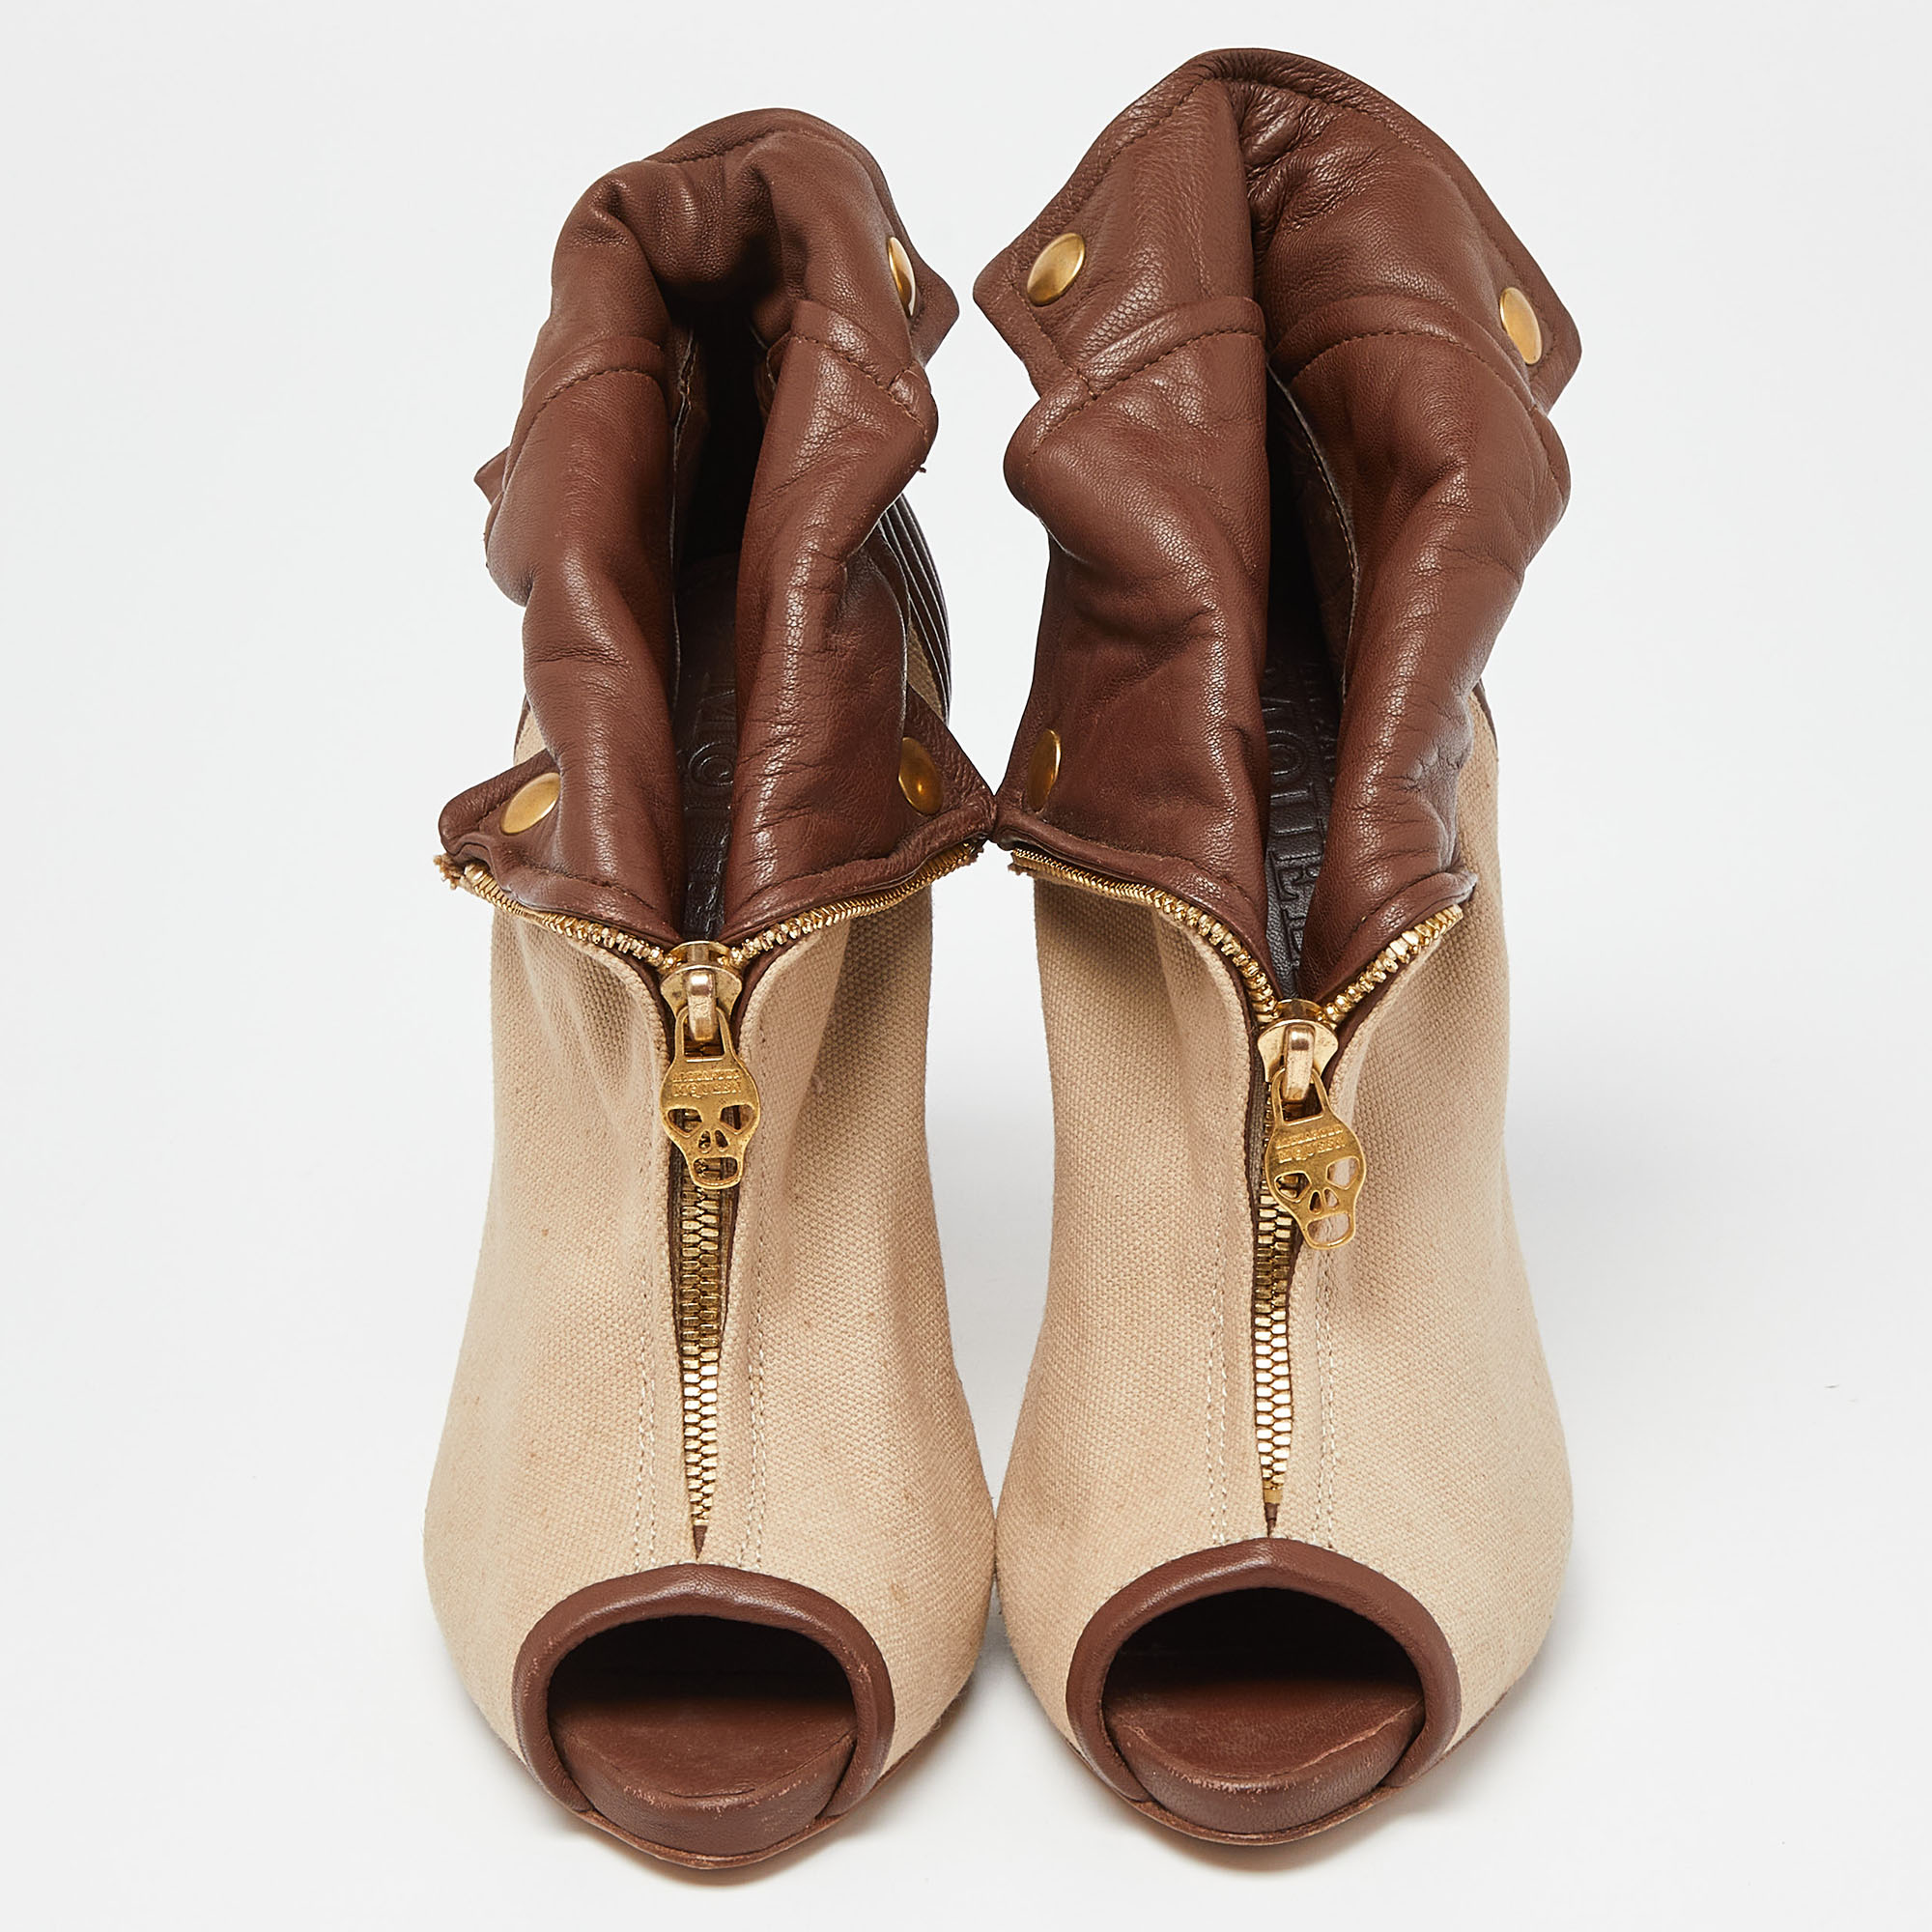 Alexander McQueen Beige/Brown Canvas And Leather Faithful Skull Peep Toe Platform Booties Size 38